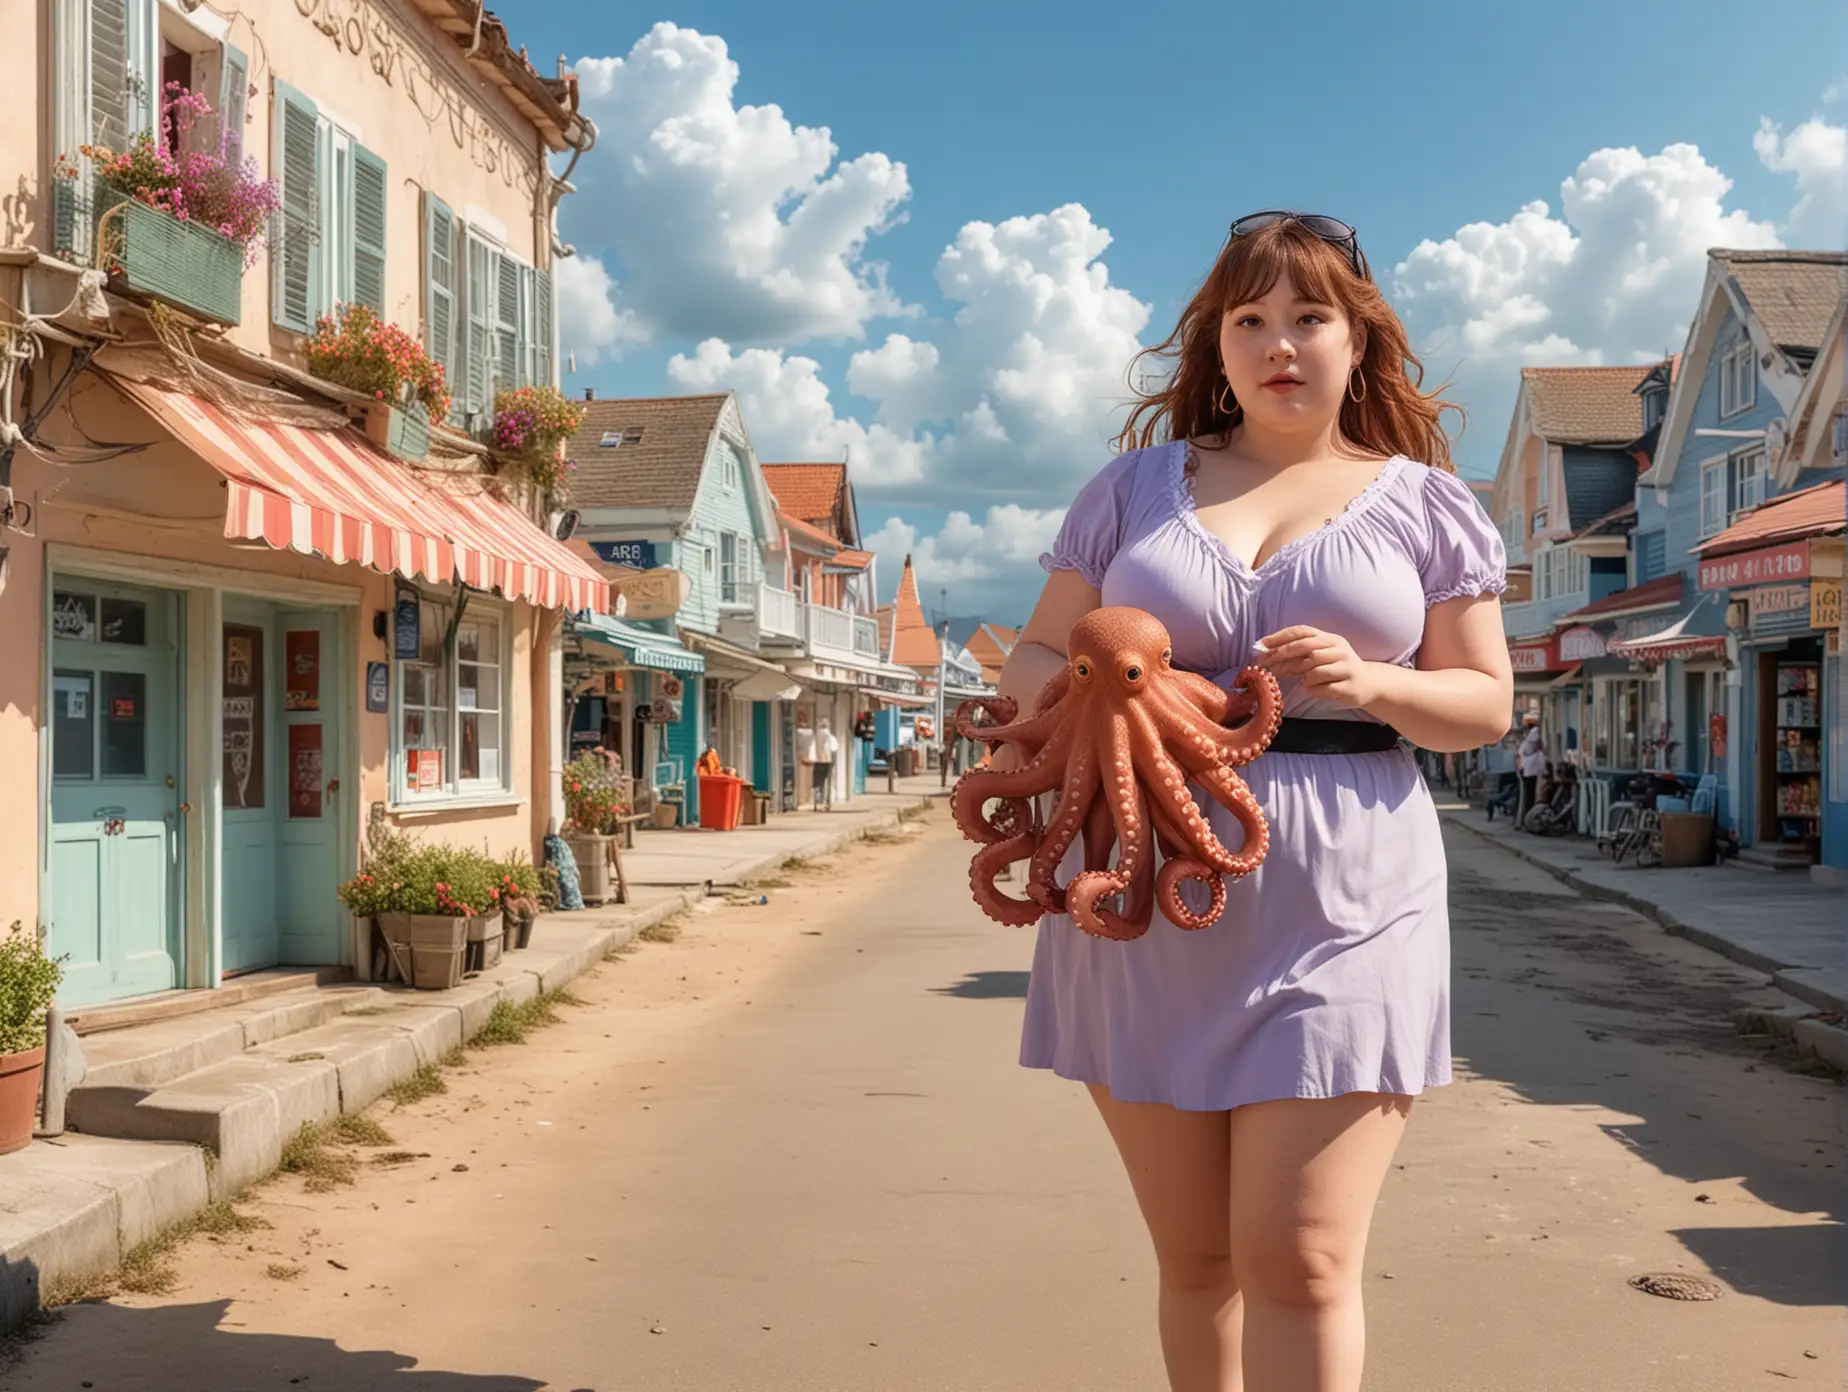 a beautiful fatty is patrolling at the seaside town, holding an octopus in one hand and soap in the other